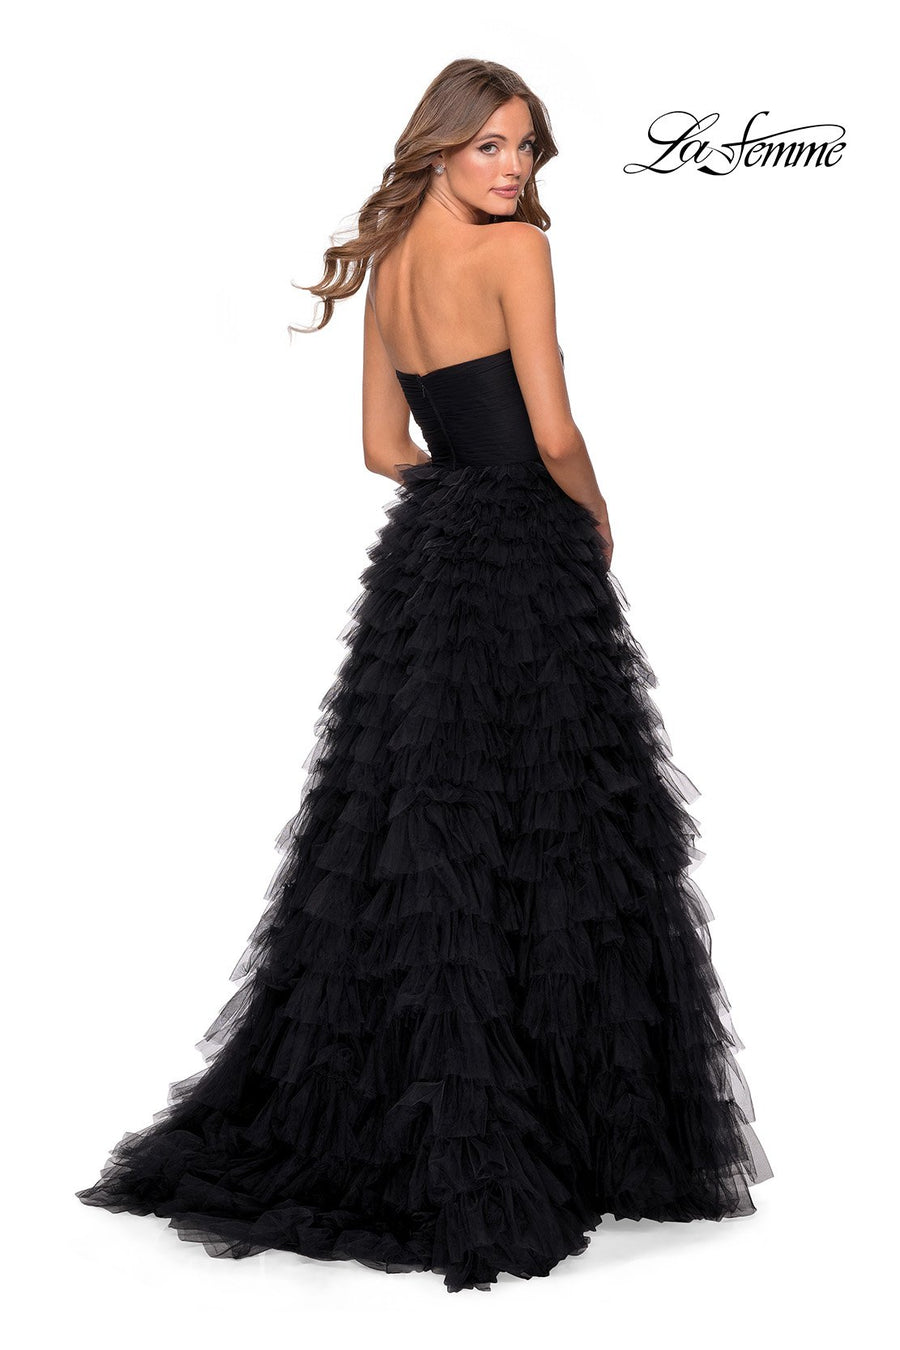 La Femme 28345 prom dress images.  La Femme 28345 is available in these colors: Black, Hot Pink, Red.